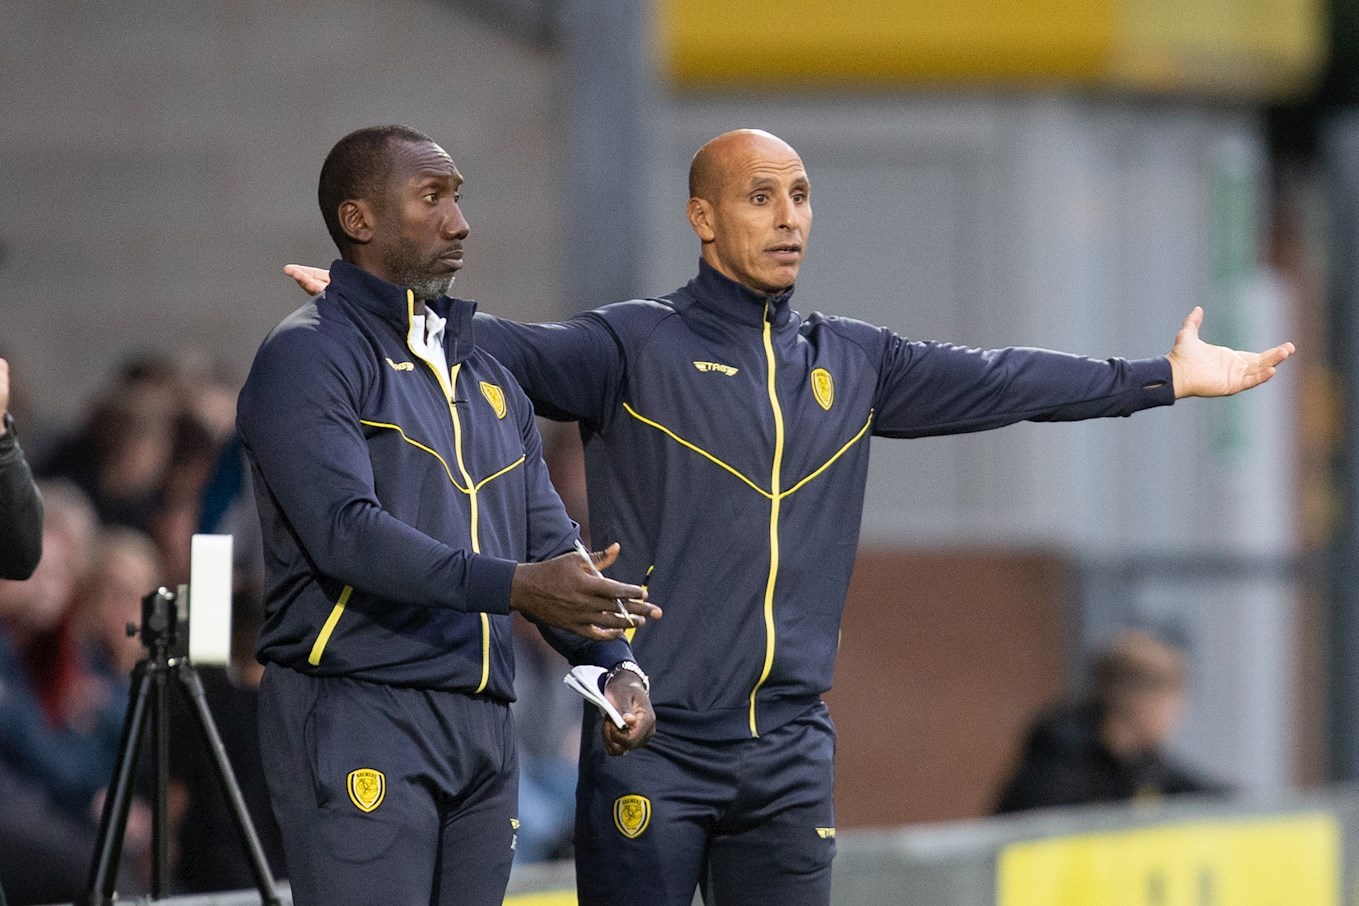 Jimmy Floyd Hasselbaink and Dino Maamria  are looking to push Burton Albion on again in 2021/22